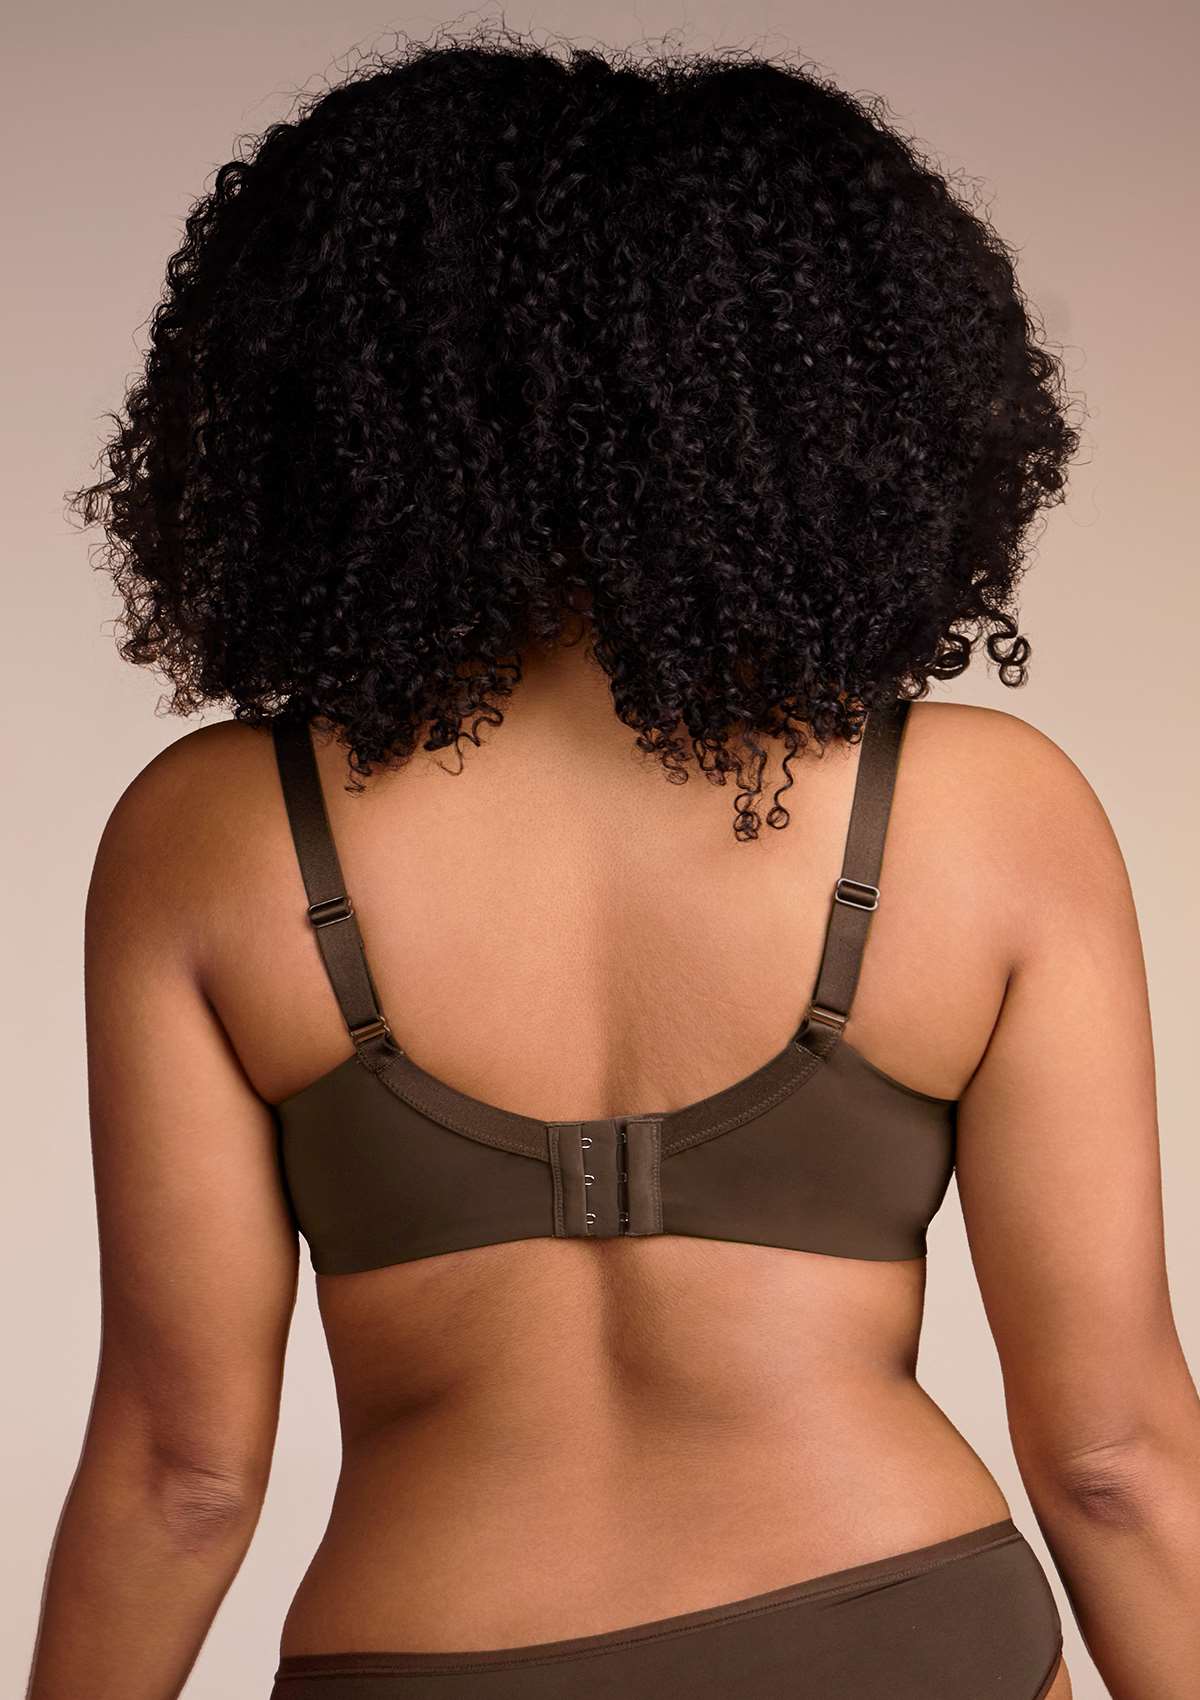 HSIA Gemma Smooth Supportive Padded T-shirt Bra - For Full Figures - Cocoa Brown / 40 / D